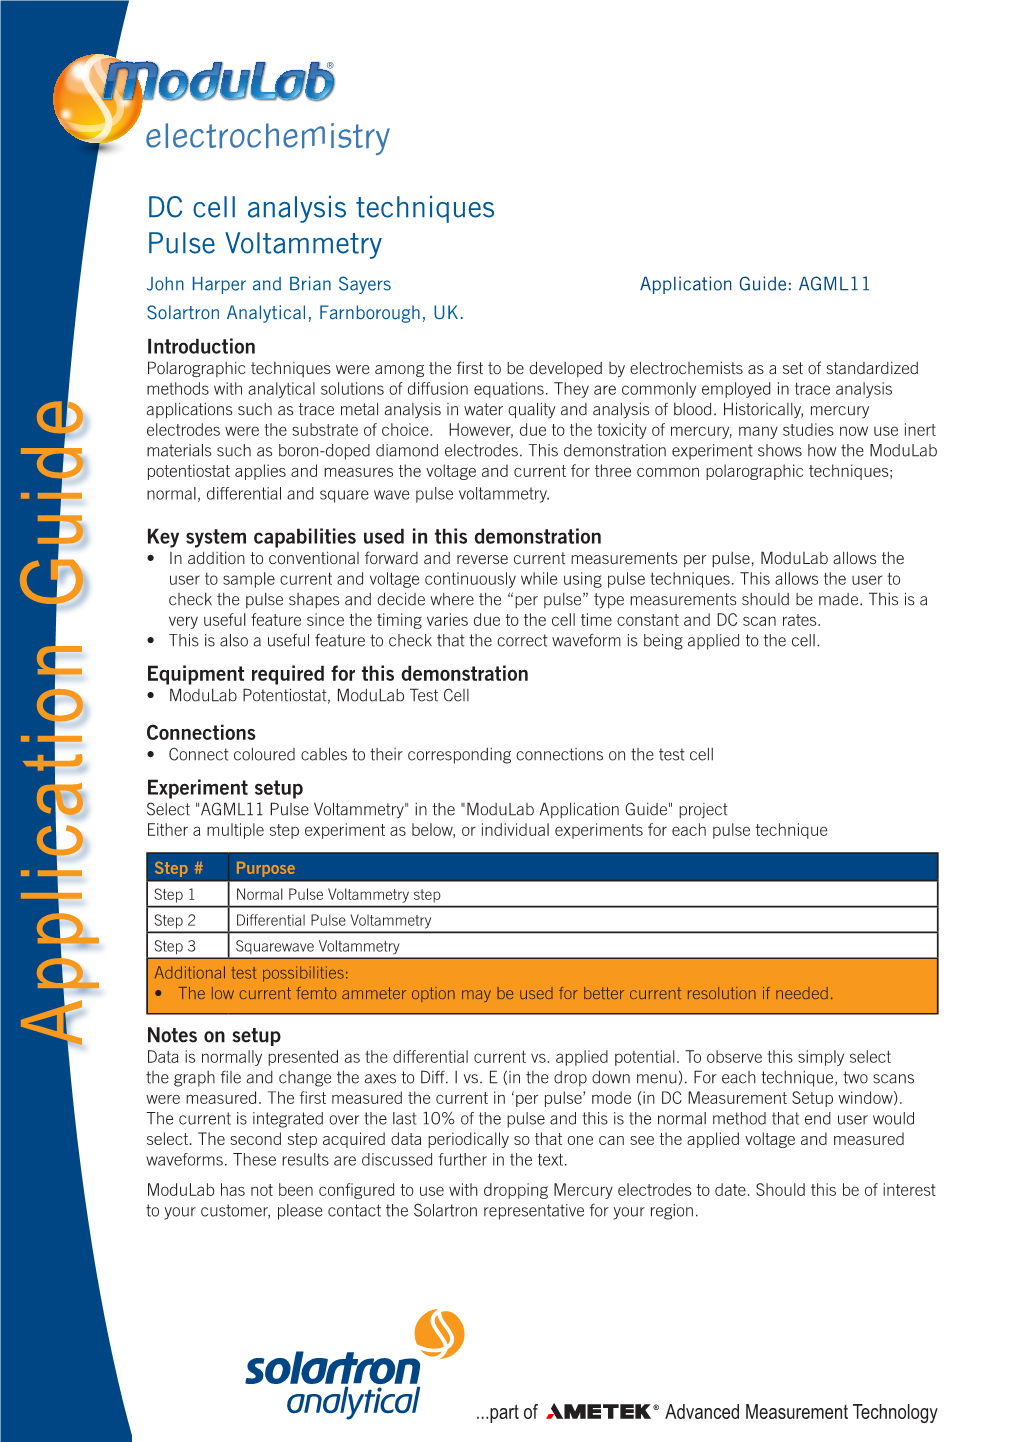 DC Cell Analysis Techniques Pulse Voltammetry John Harper and Brian Sayers Application Guide: AGML11 Solartron Analytical, Farnborough, UK